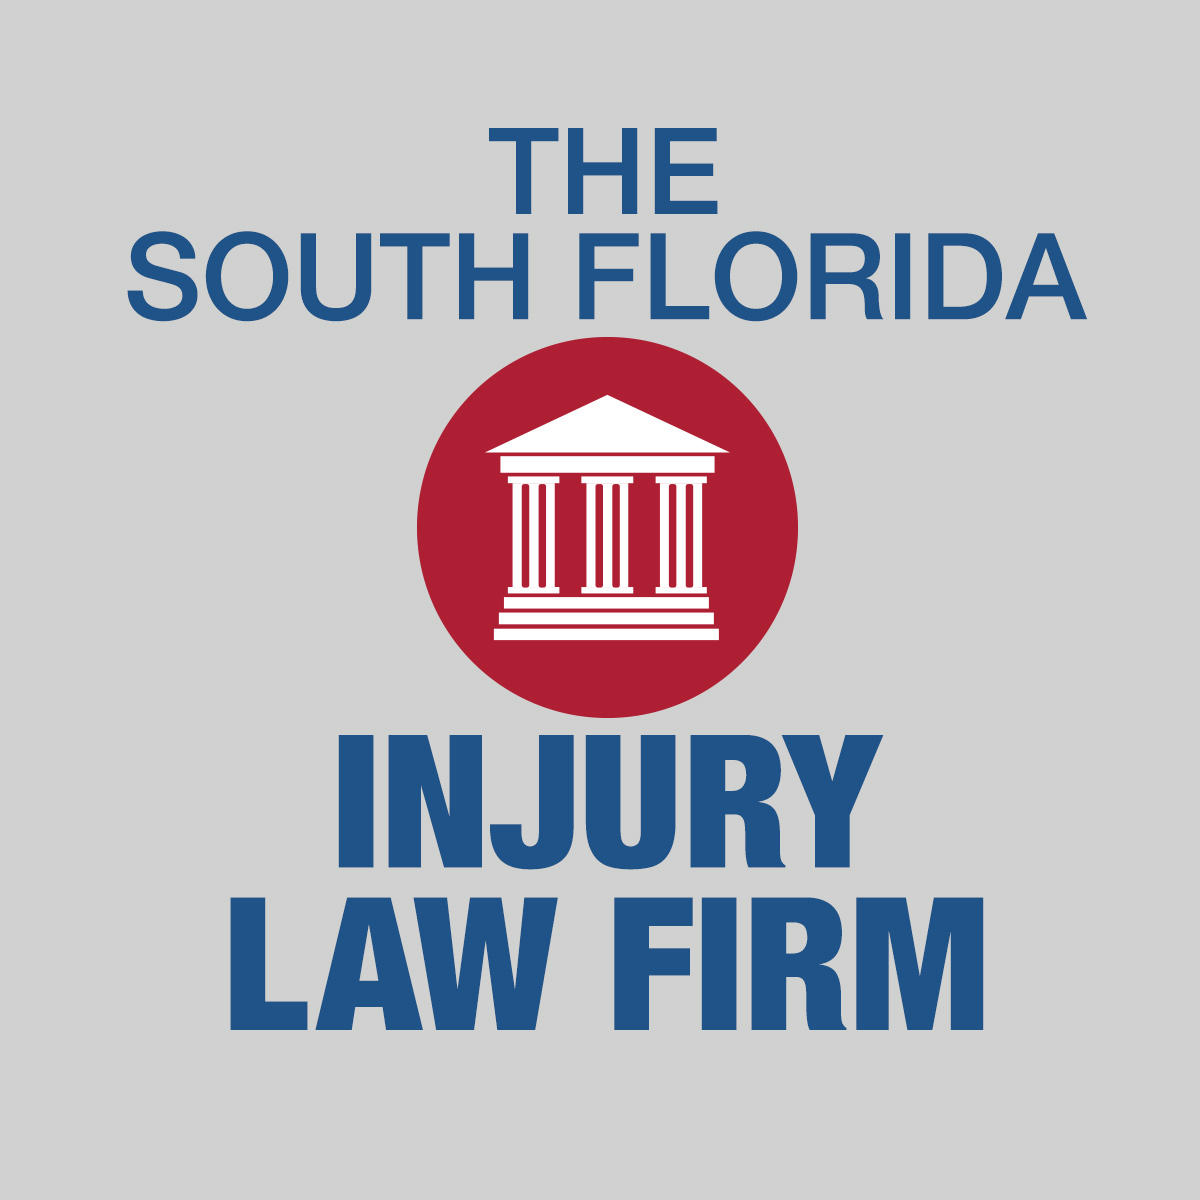 Braxton, Stein & Posner: The South Florida Injury Law Firm - Coral Springs, FL 33076 - (954)599-8754 | ShowMeLocal.com